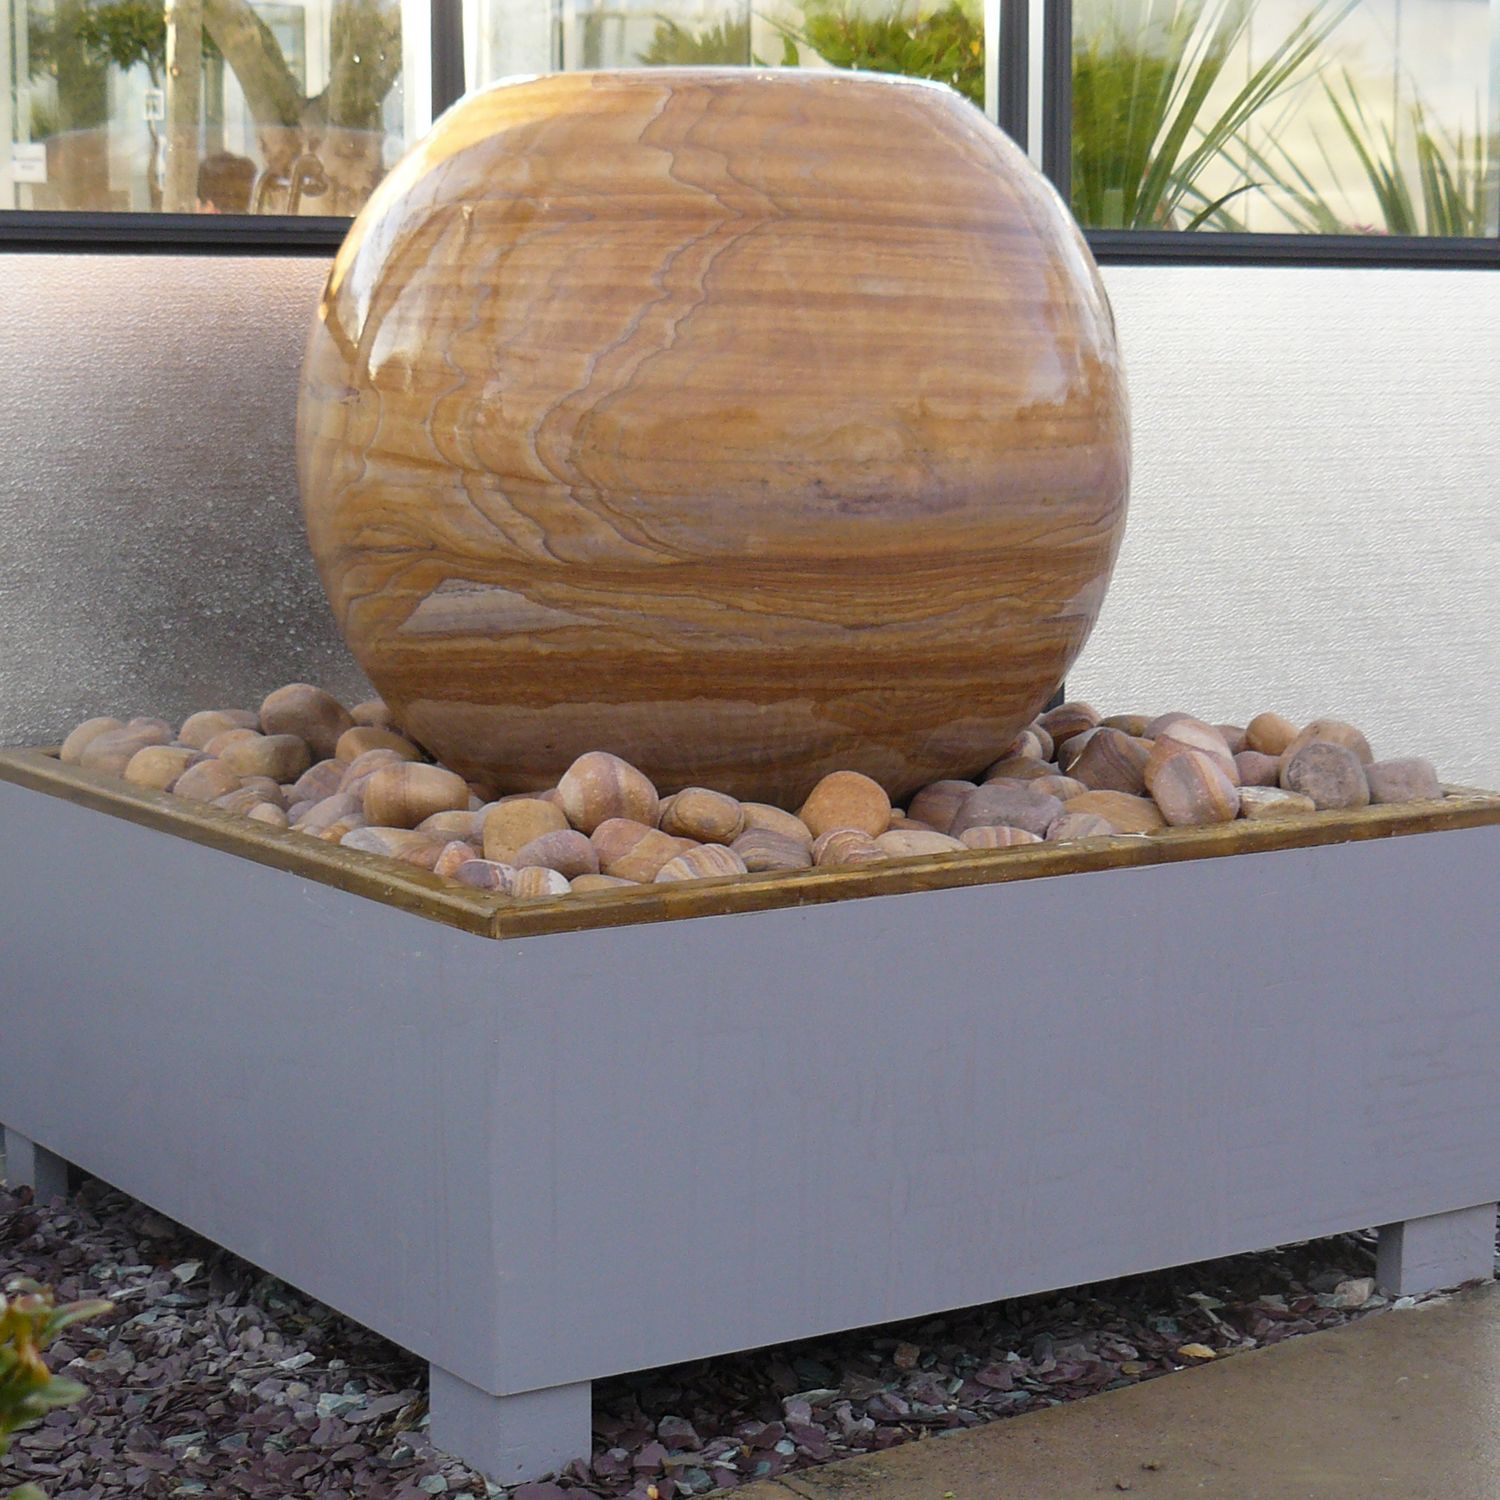 Foras Bliss Water Feature Kits